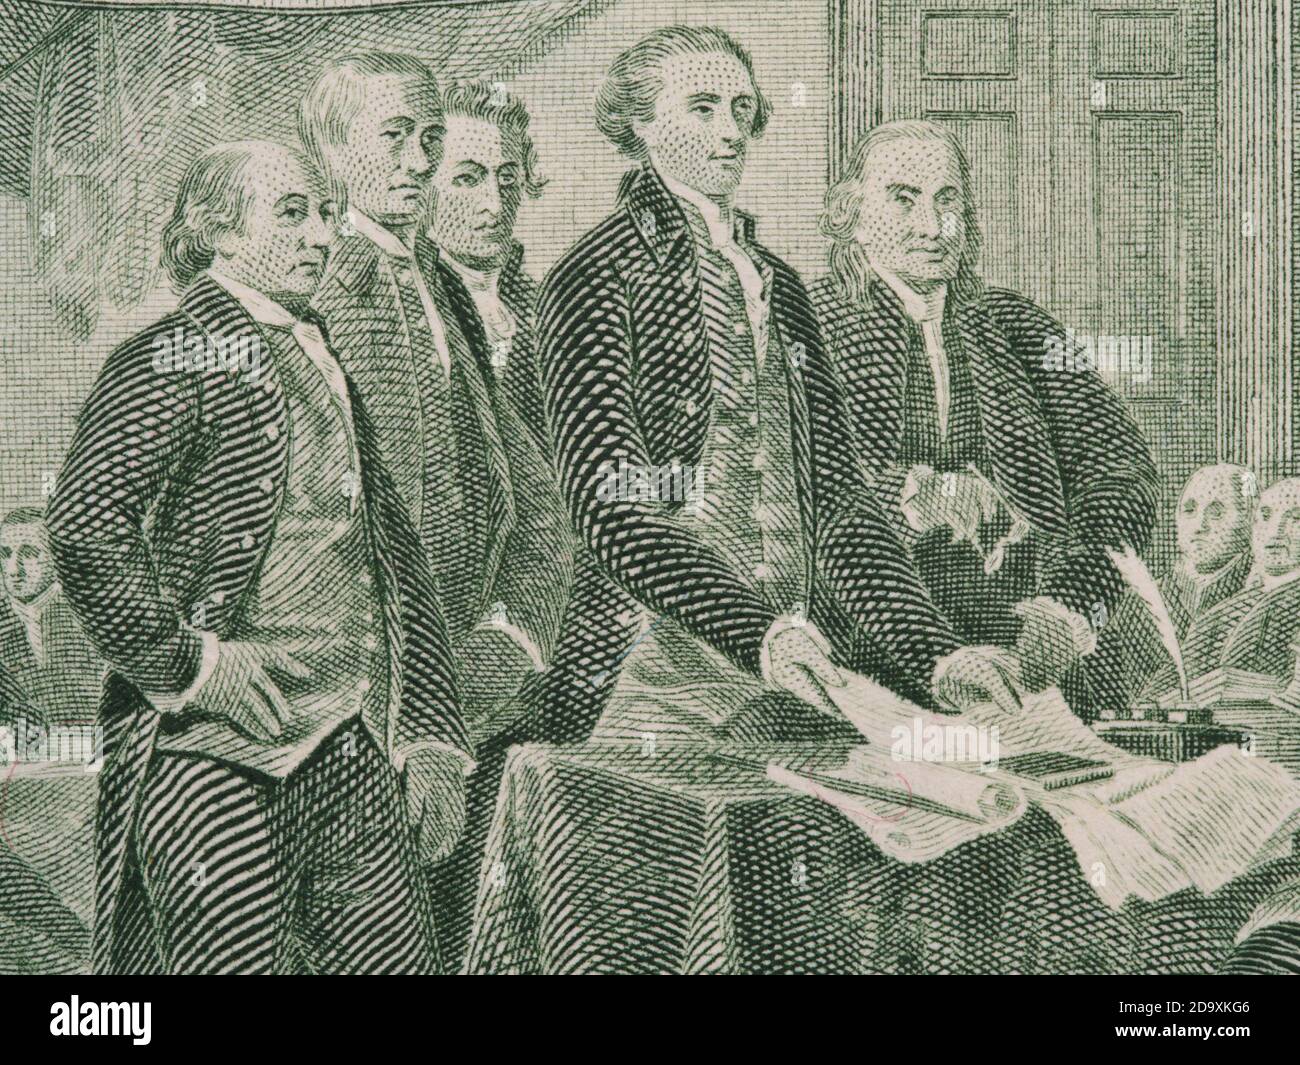 Signing  declaration of independence from us two dollar bill macro, united states money closeup Stock Photo